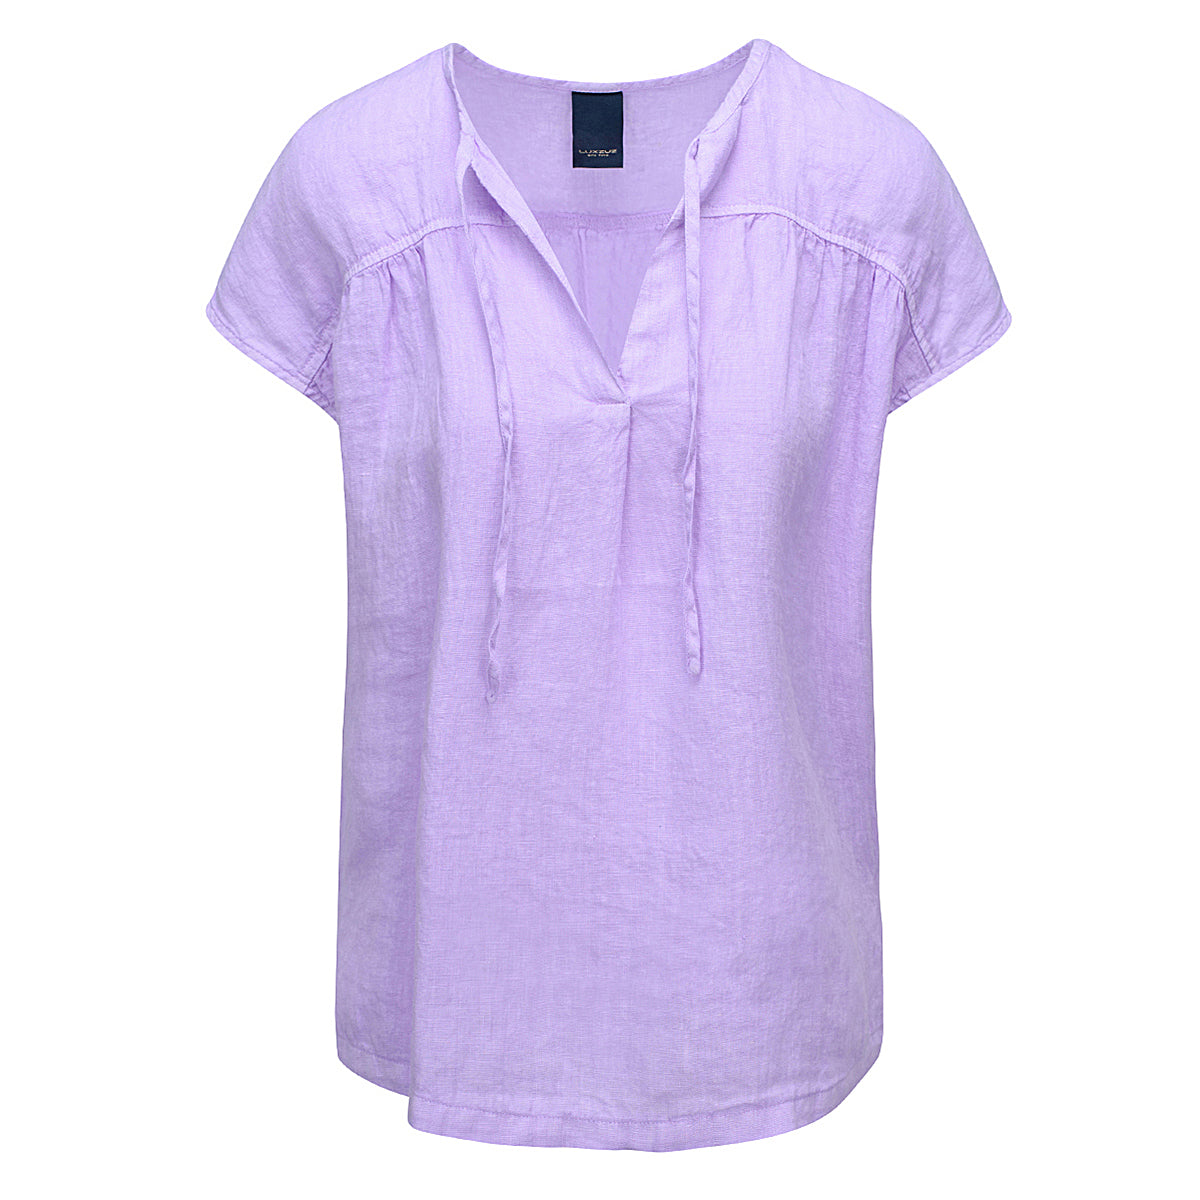 LUXZUZ // ONE TWO Karlina Top Top 421 Lavender